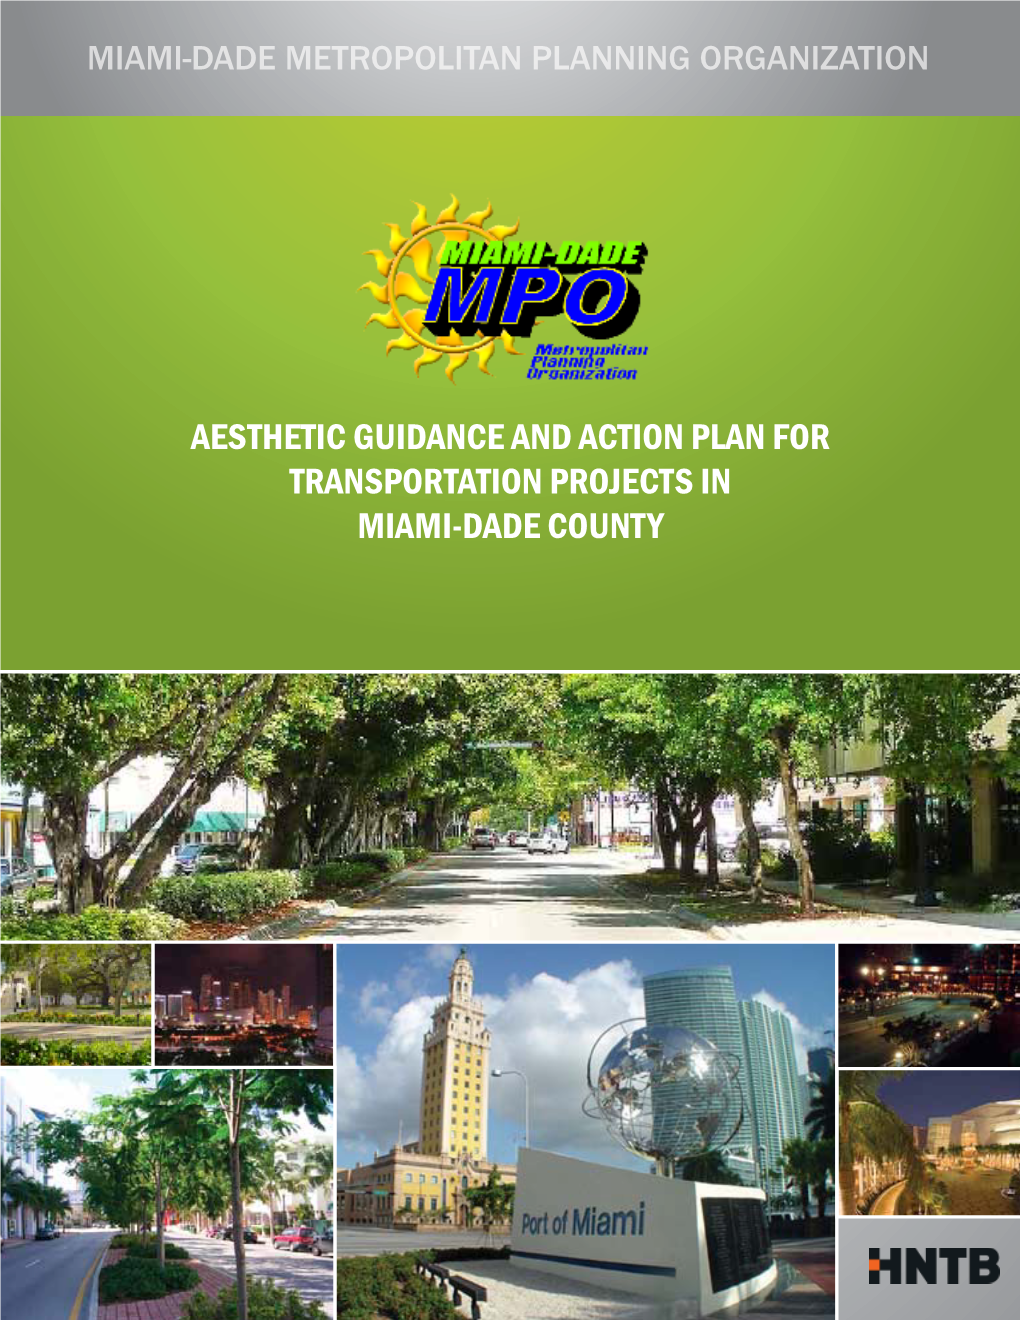 Aesthetic Guidance and Action Plan for Transportation Projects in Miami-Dade County